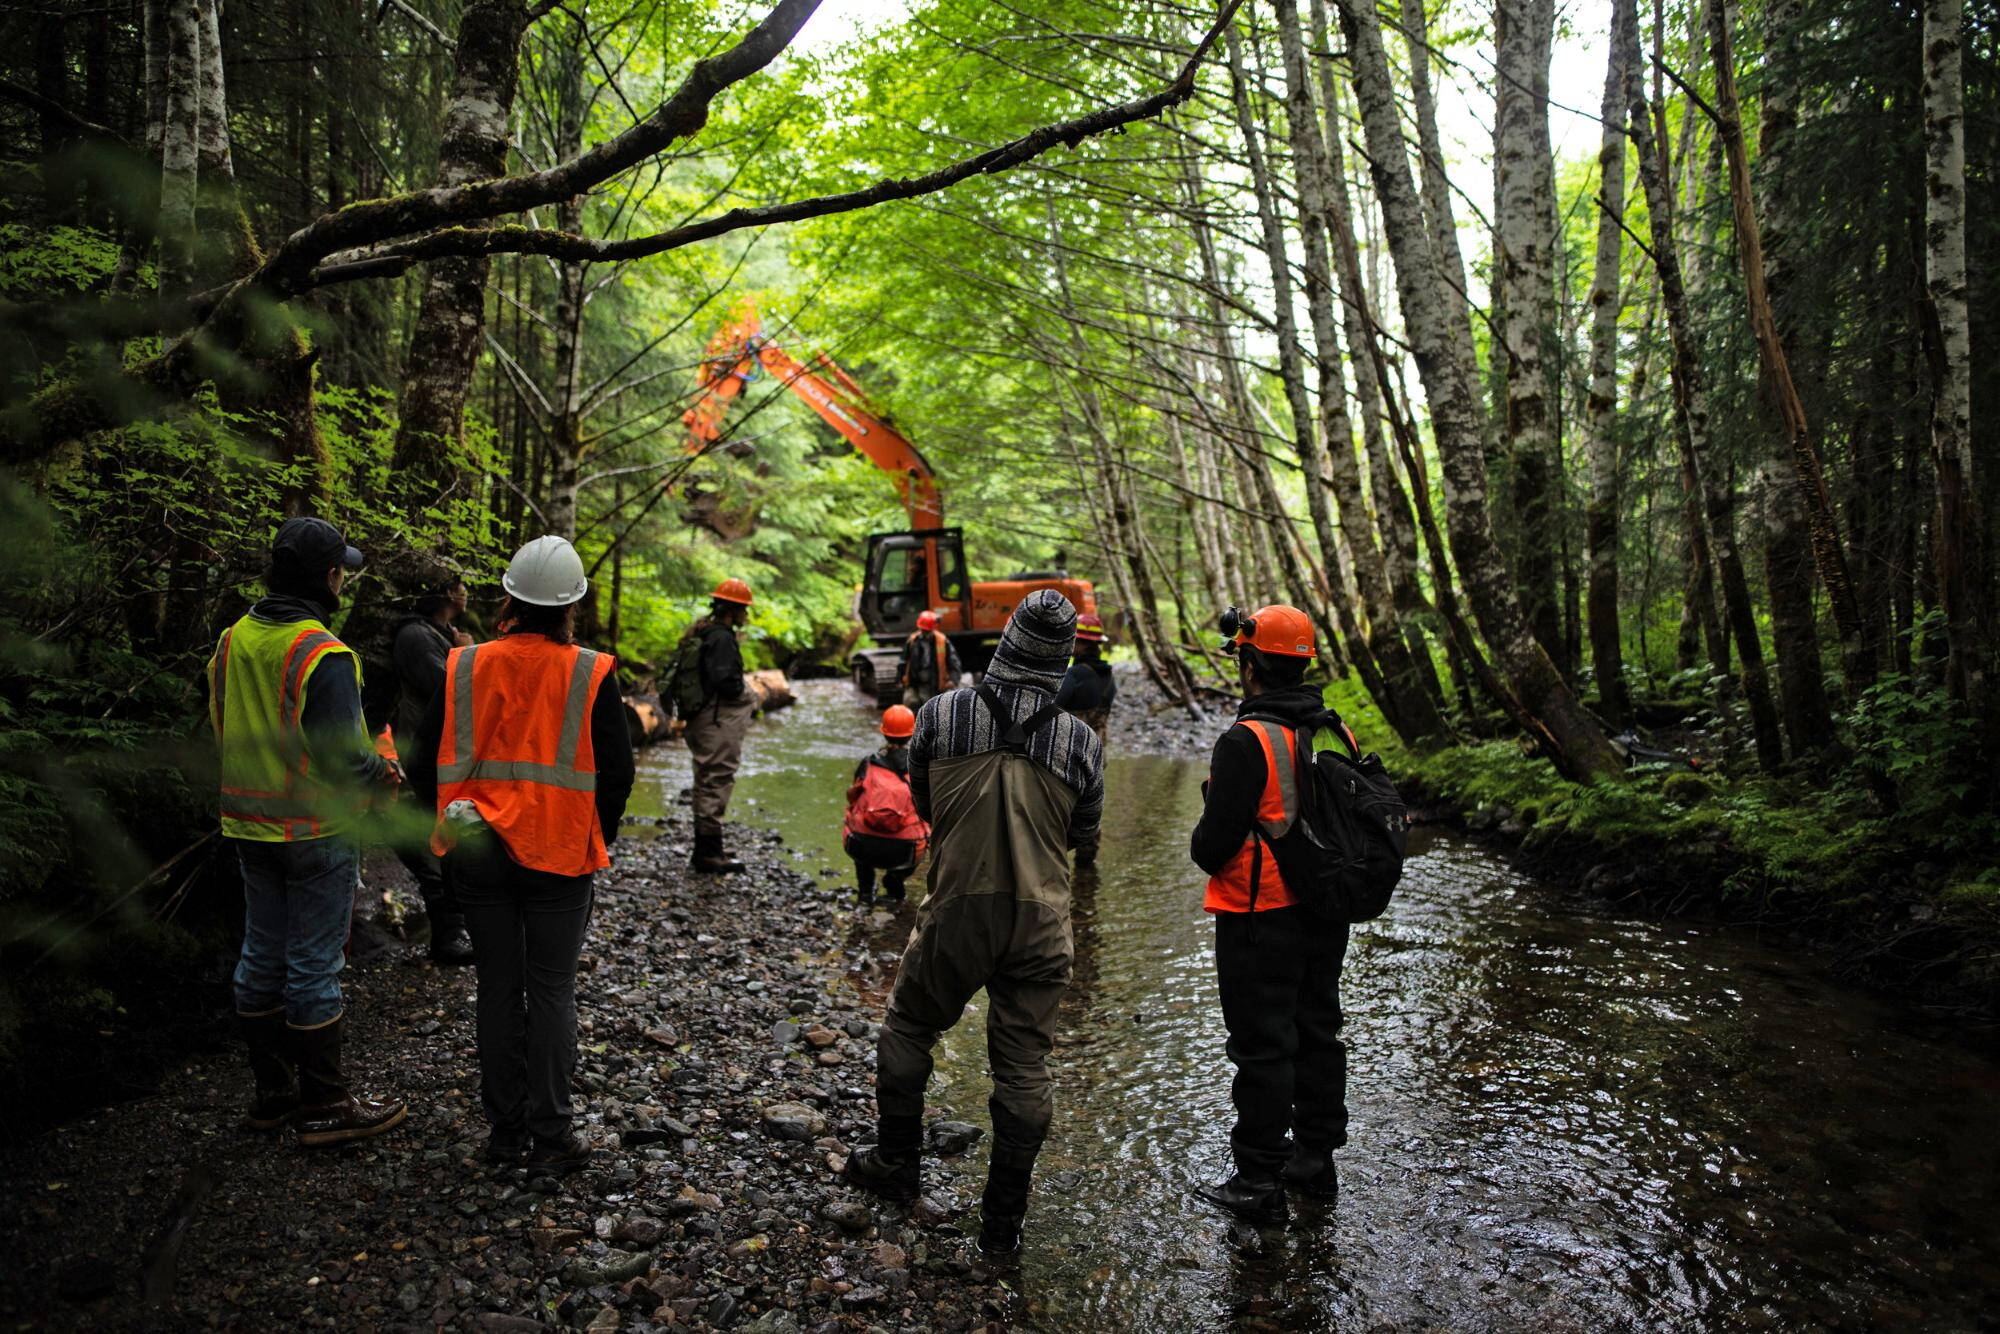 A U.S. Forest Service crew works on a riverbed project in the Tongass National Forest. (U.S. Forest Service)